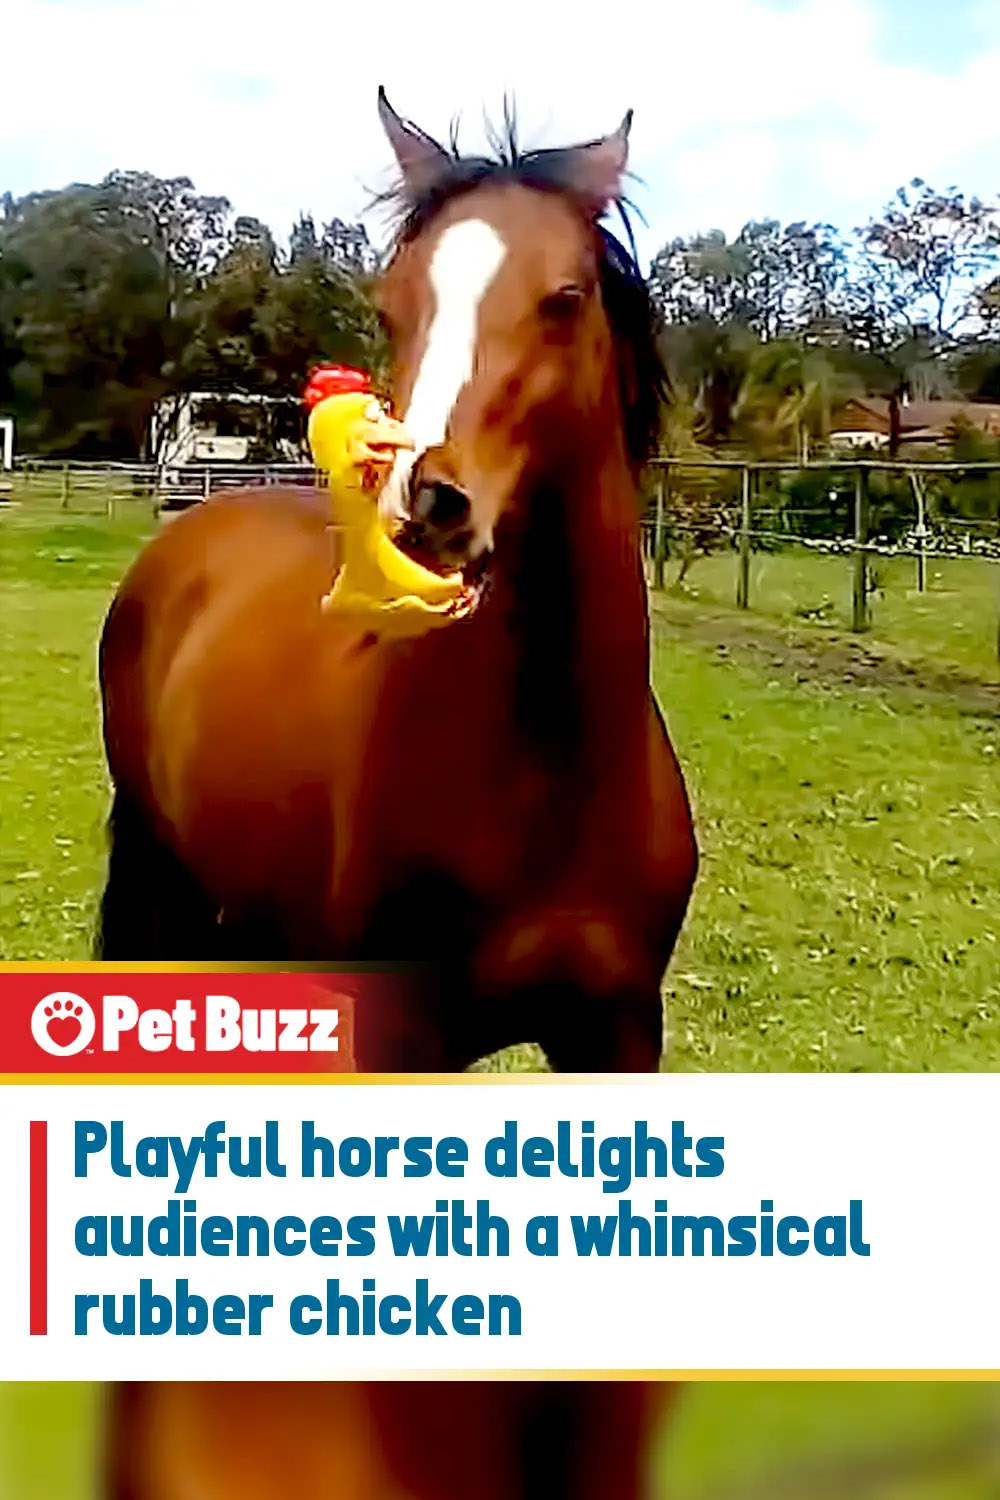 Playful horse delights audiences with a whimsical rubber chicken